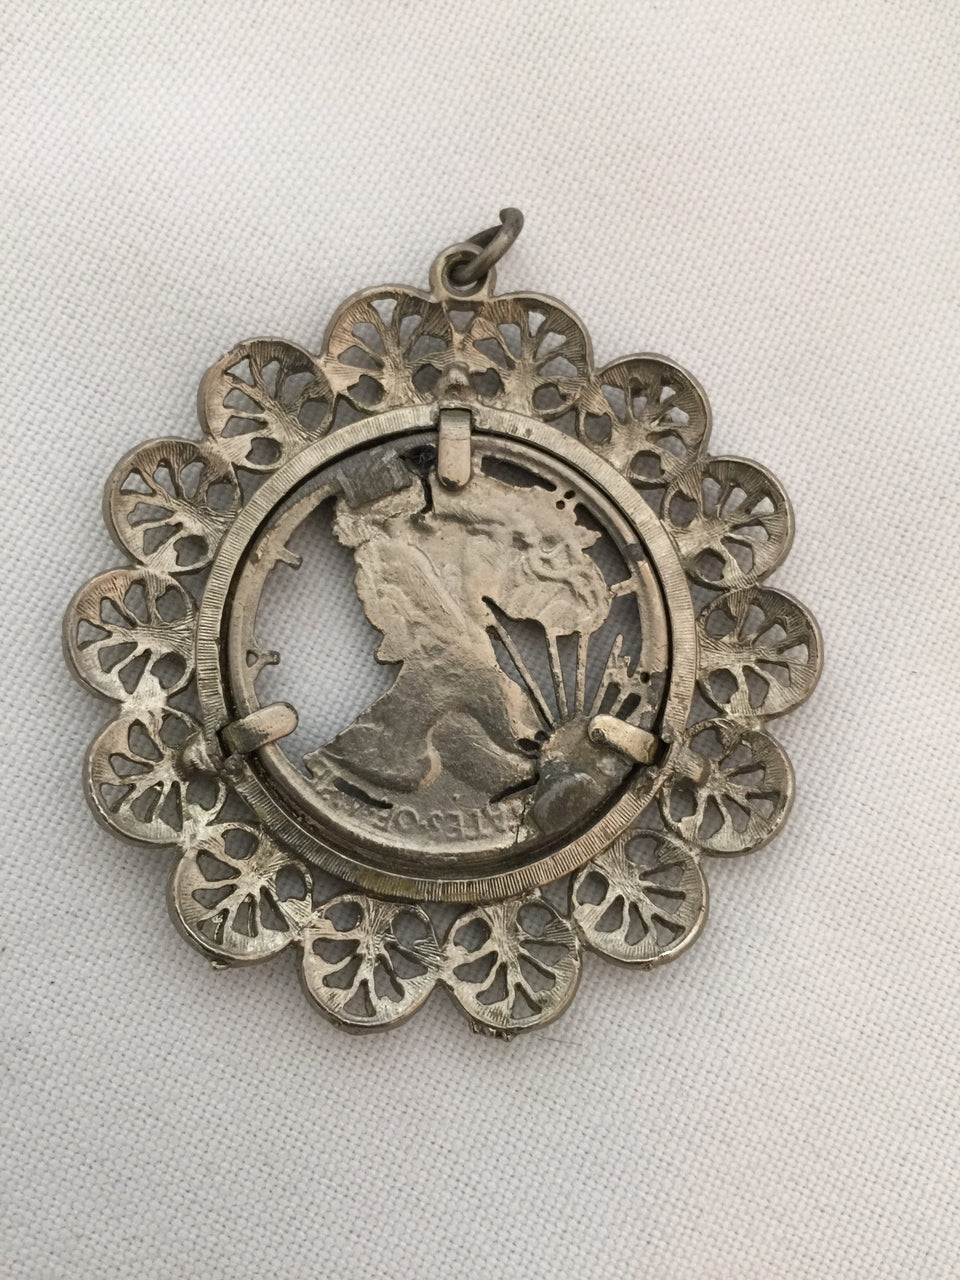 Vintage Coin Pendant of Lady Liberty 1943